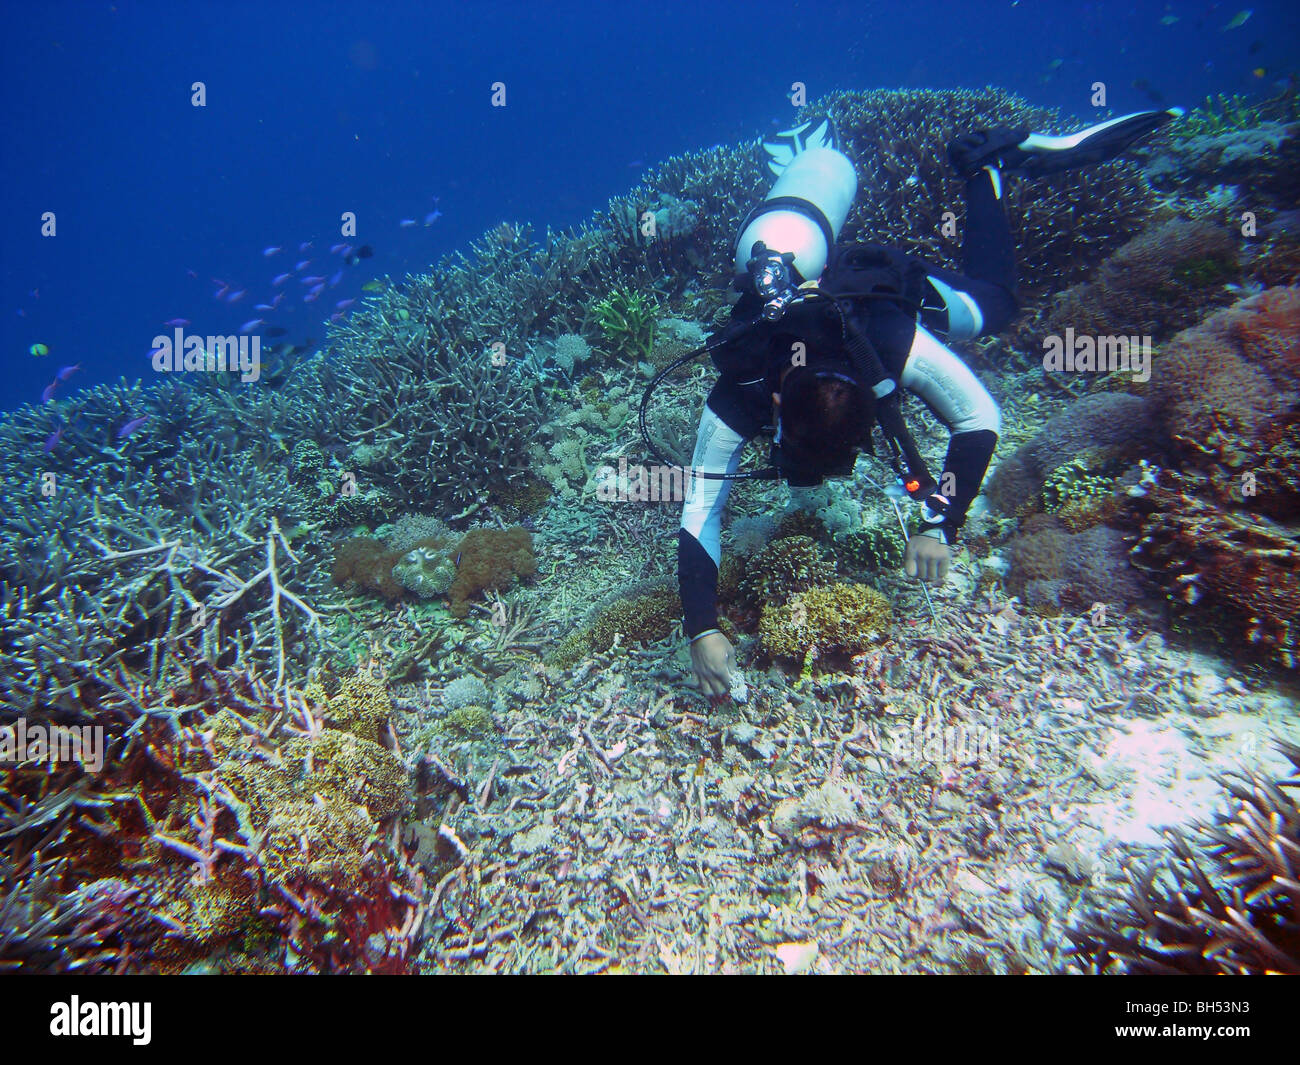 Diver inspecting blast crater in coral reef resulting from dynamite fishing, Komodo Marine Park, Indonesia. No MR or PR Stock Photo